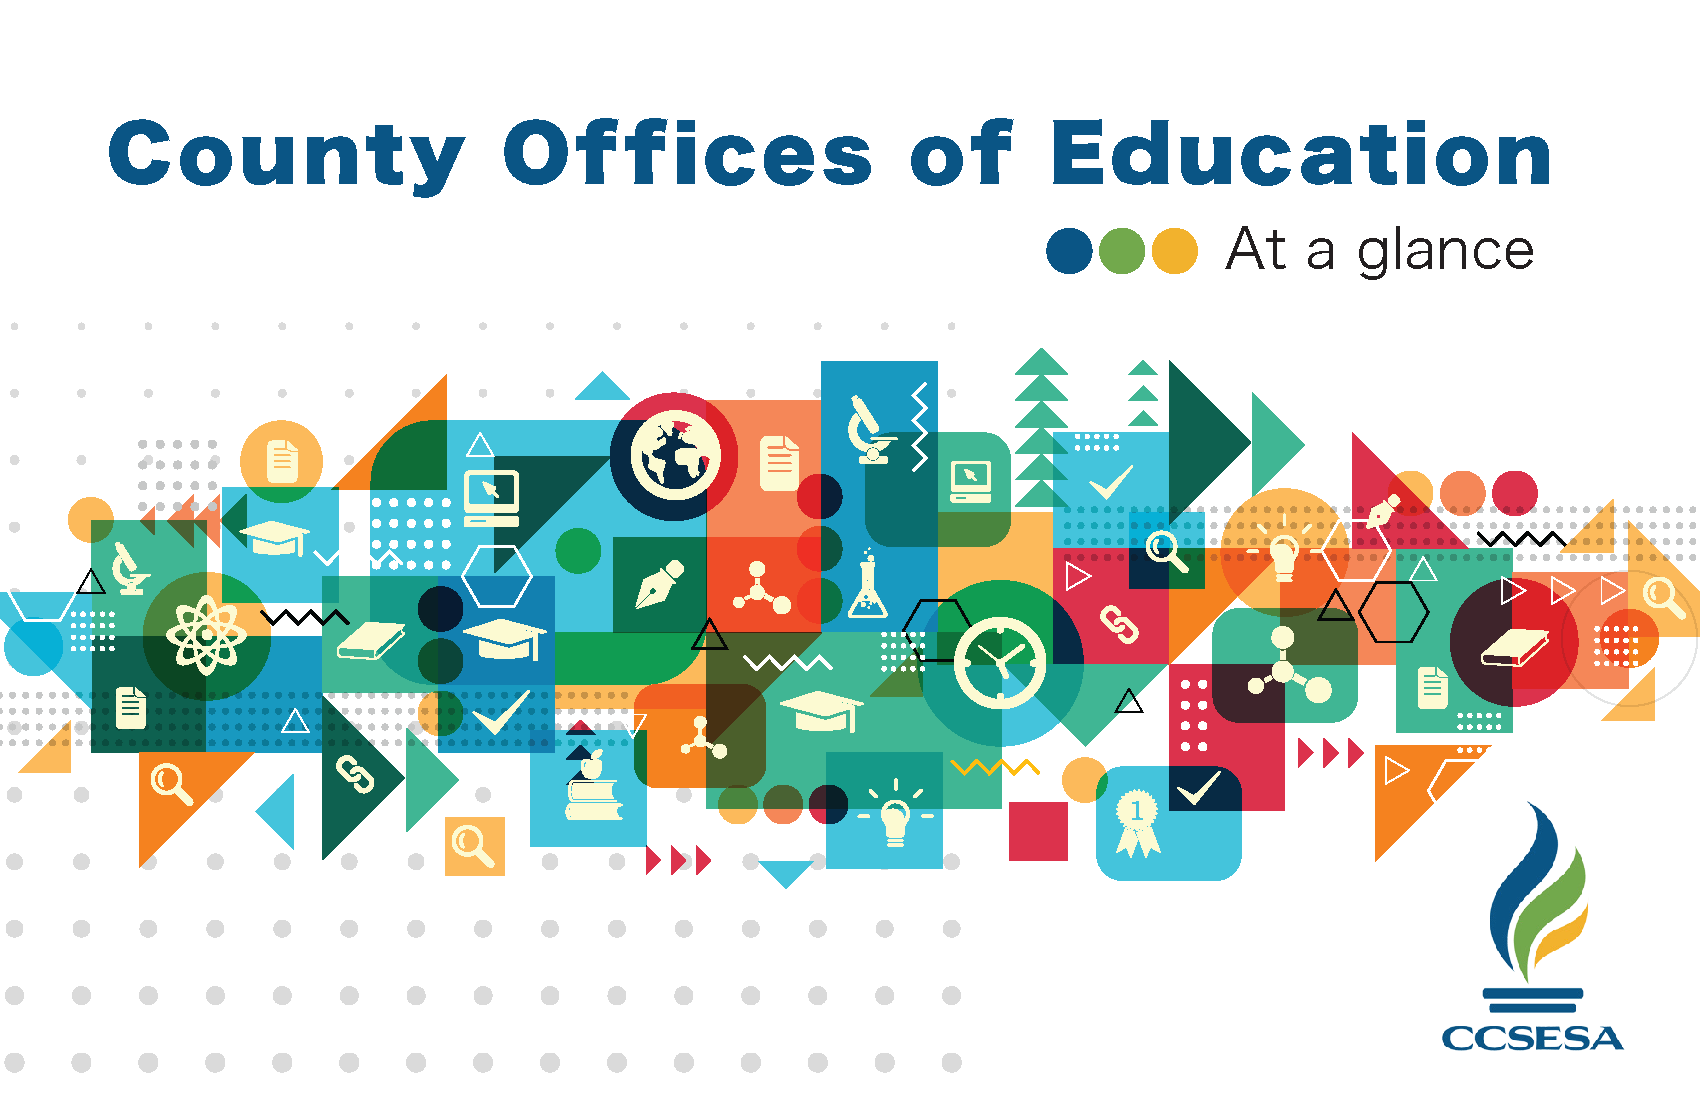 County Office of Education at a glance presentation